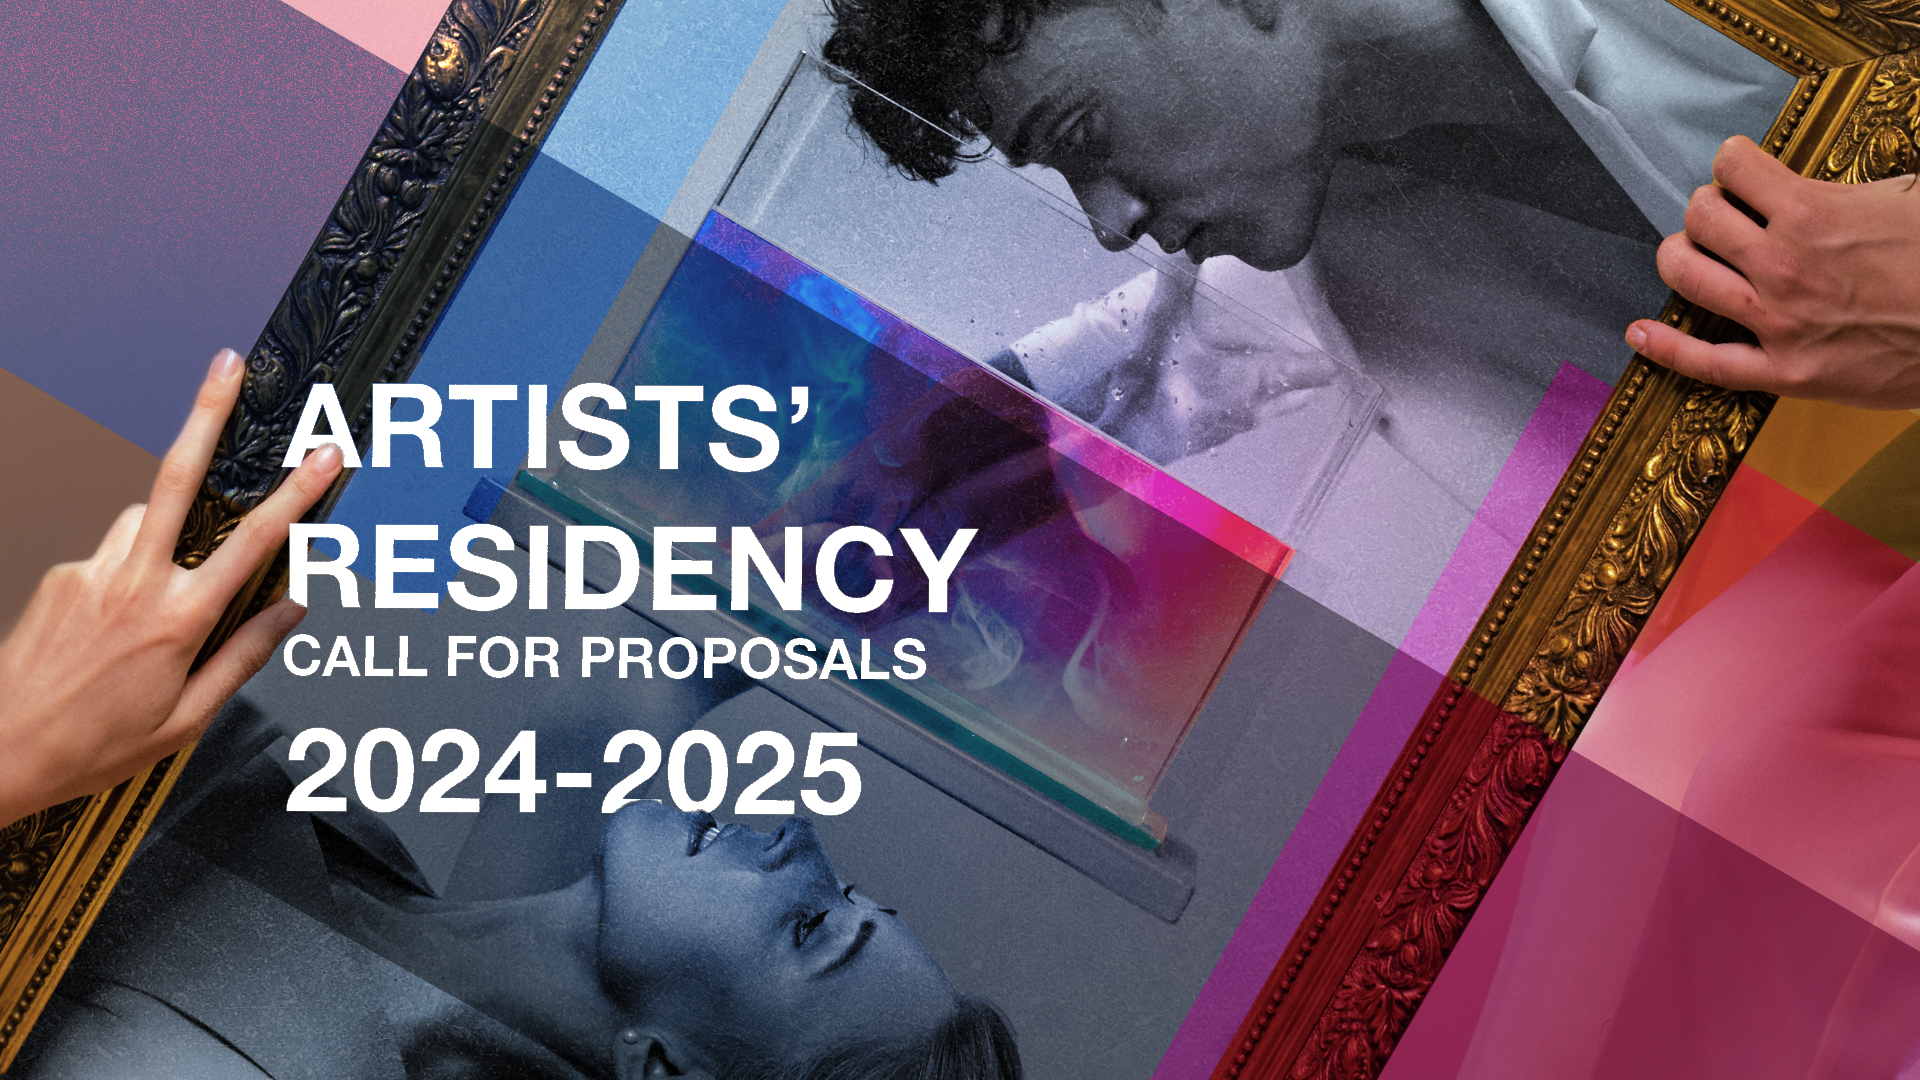 Artists’ Residency Call